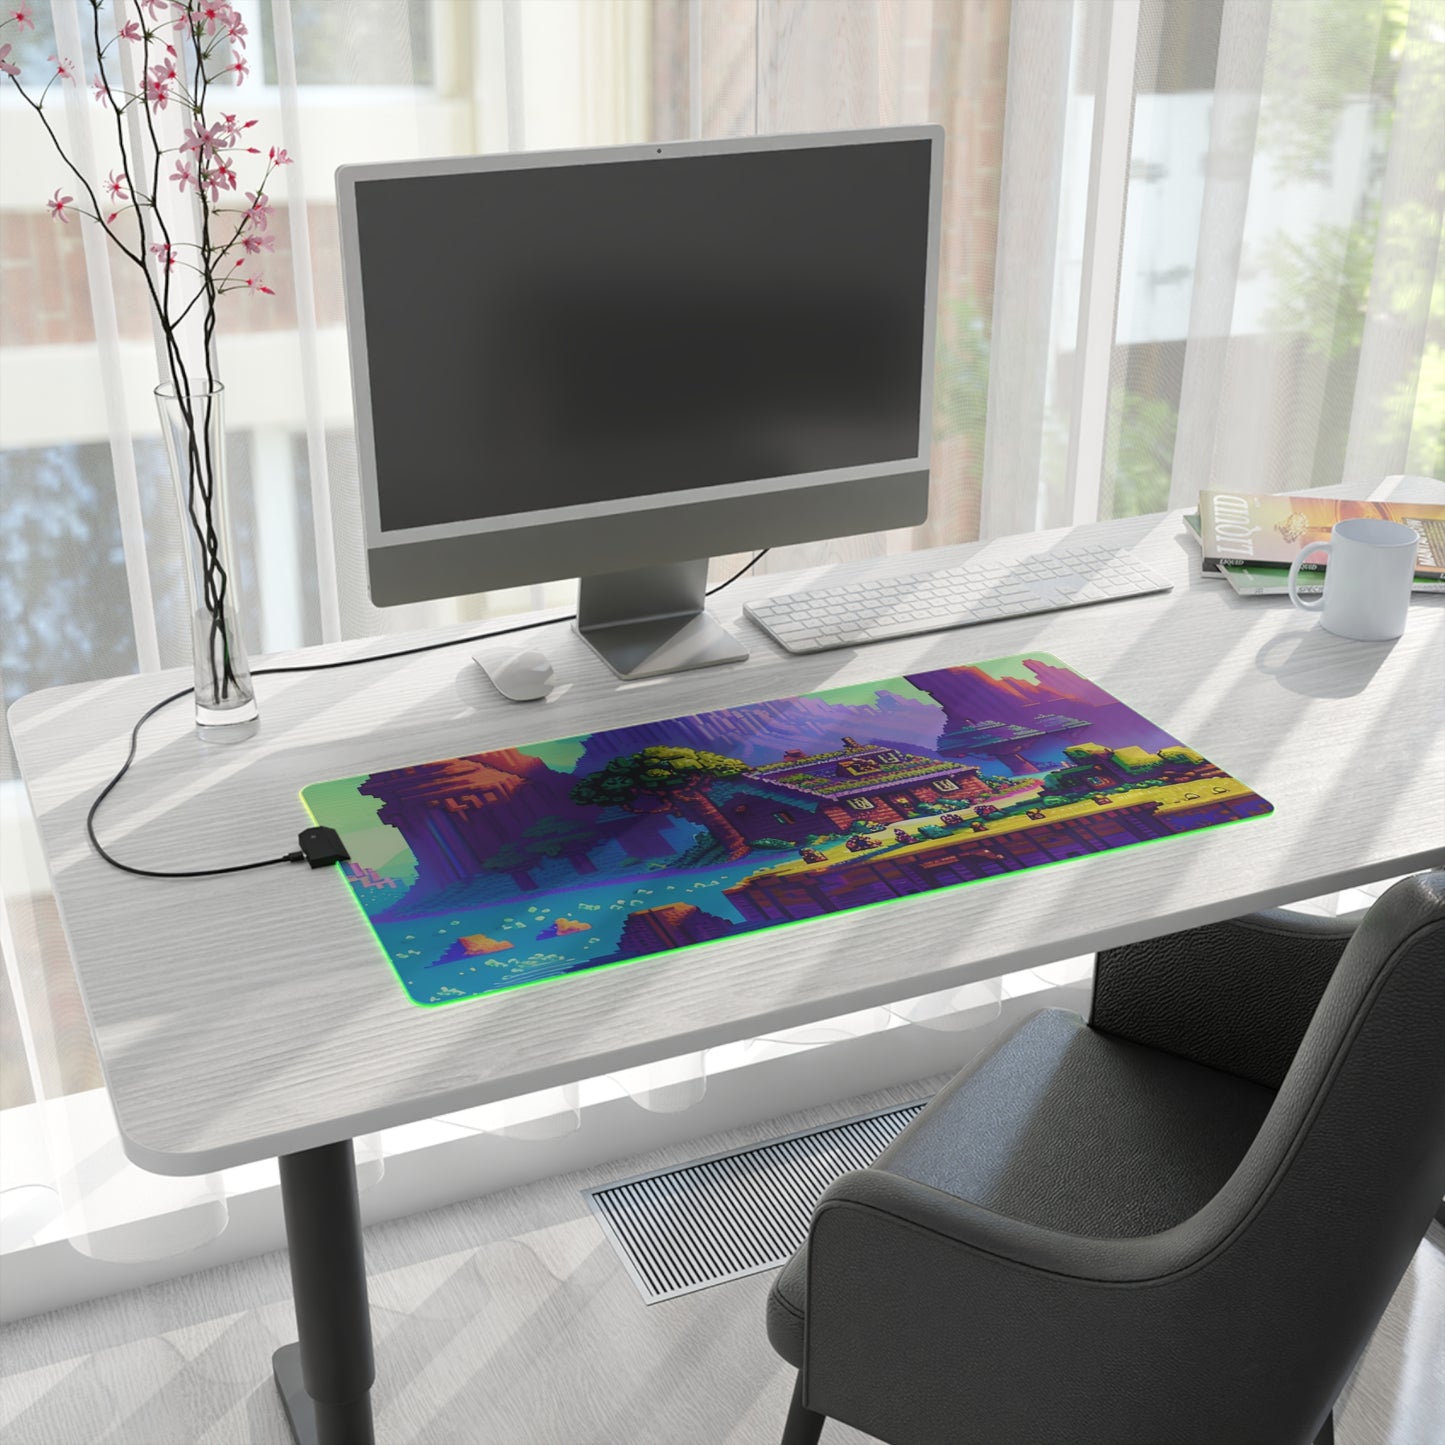 Pixel cabin LED Gaming Mouse Pad